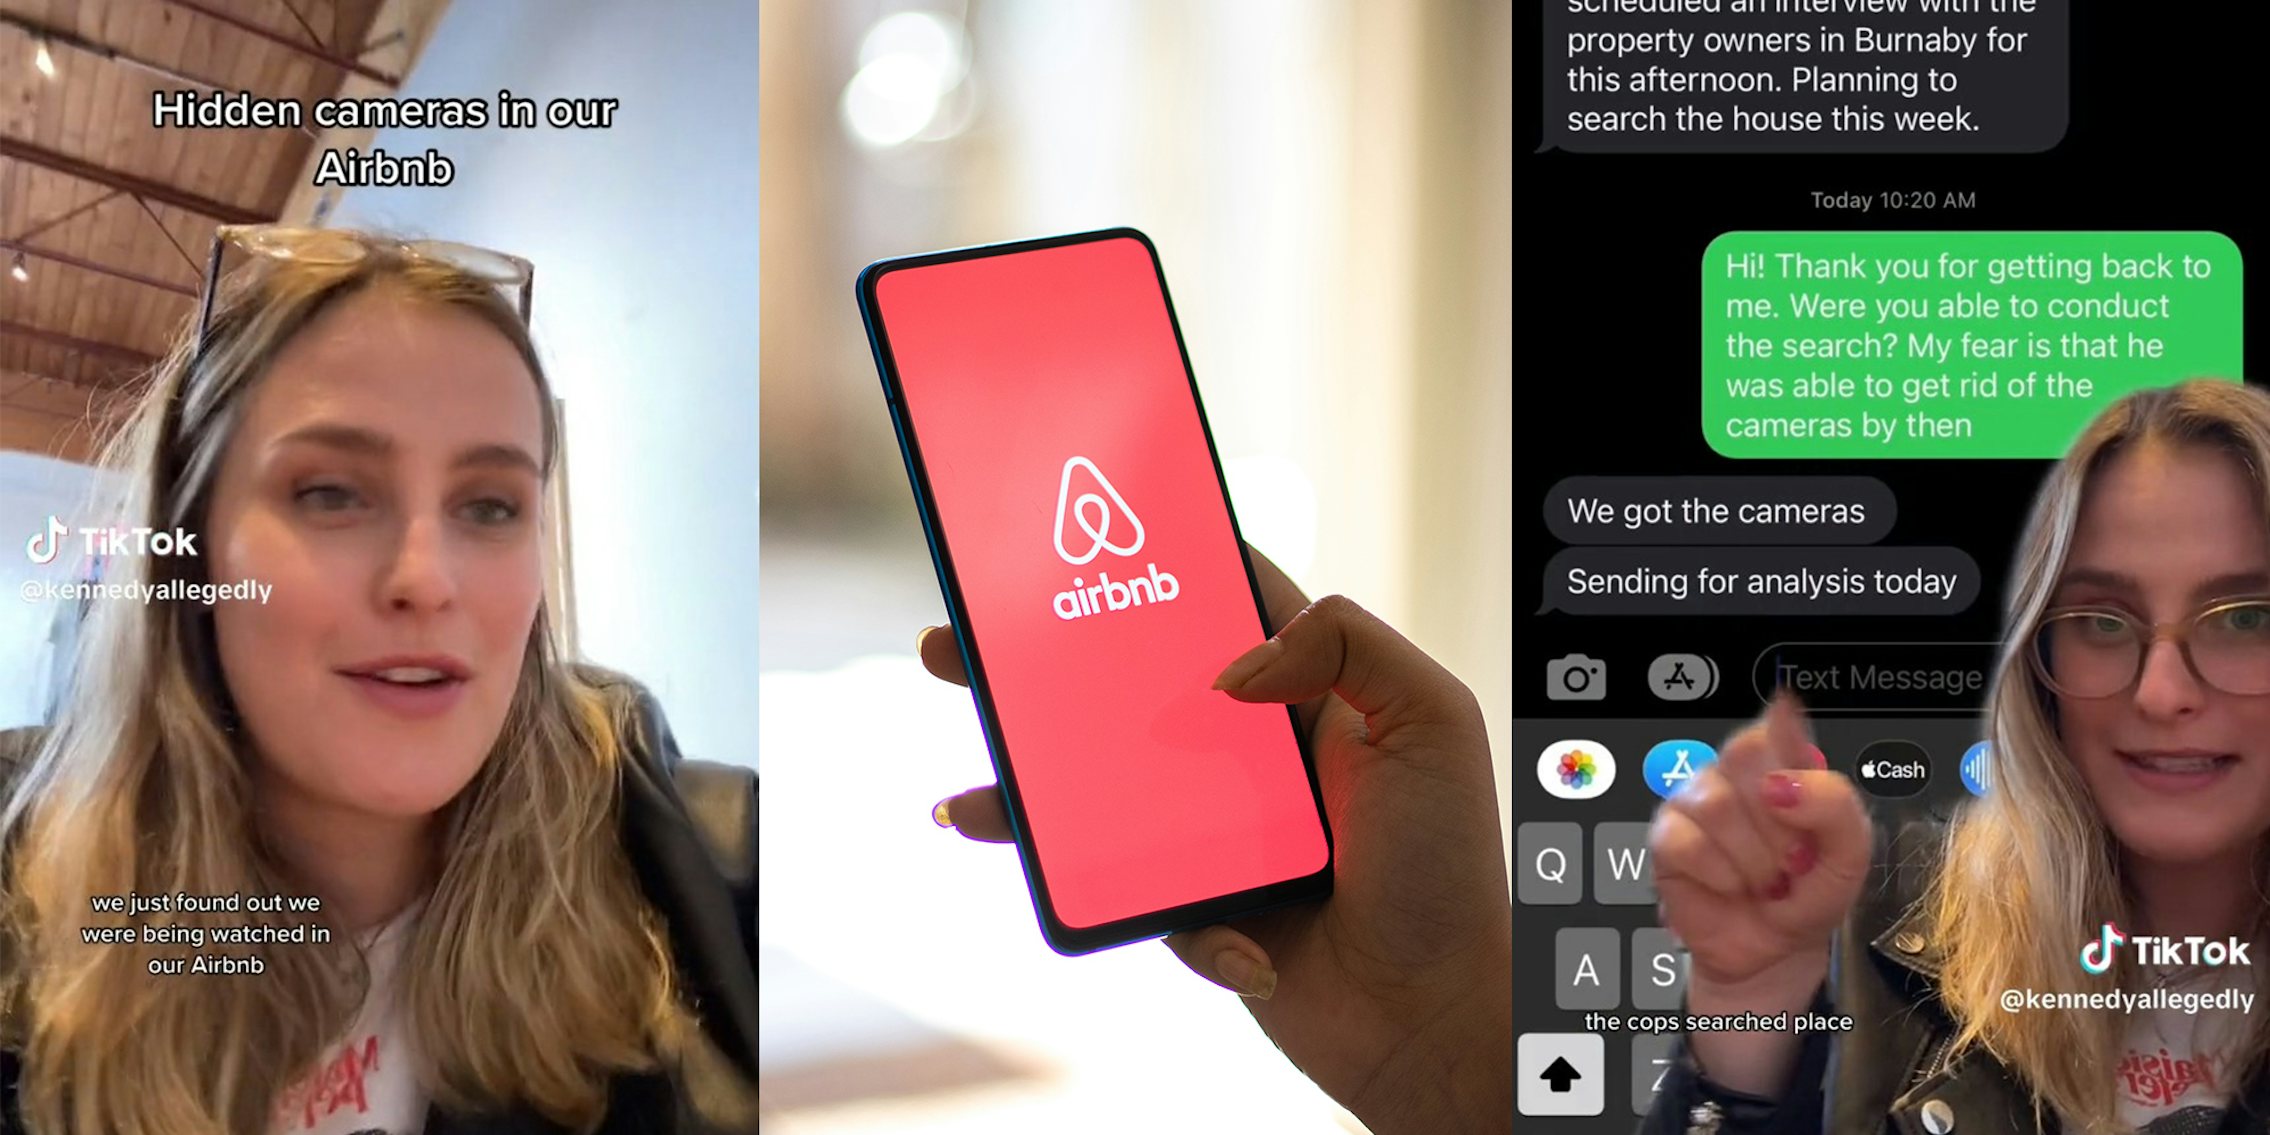 Woman says they found a hidden camera in the bathroom at their Airbnb